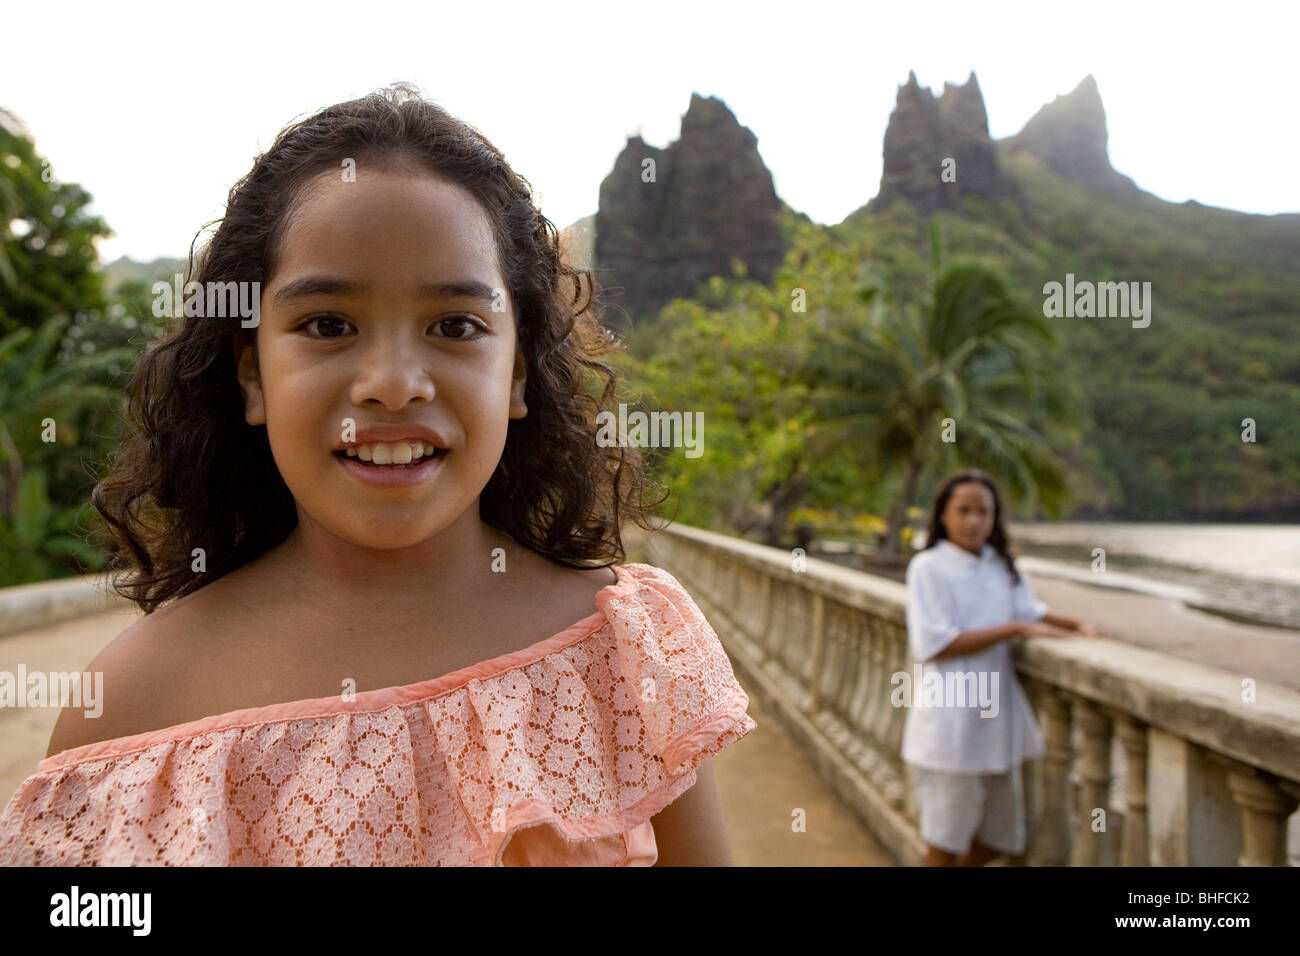 Two girls in front of peaks at Hatiheu, Nuku Hiva, Marquesas, Polynesia, Oceania Stock Photo